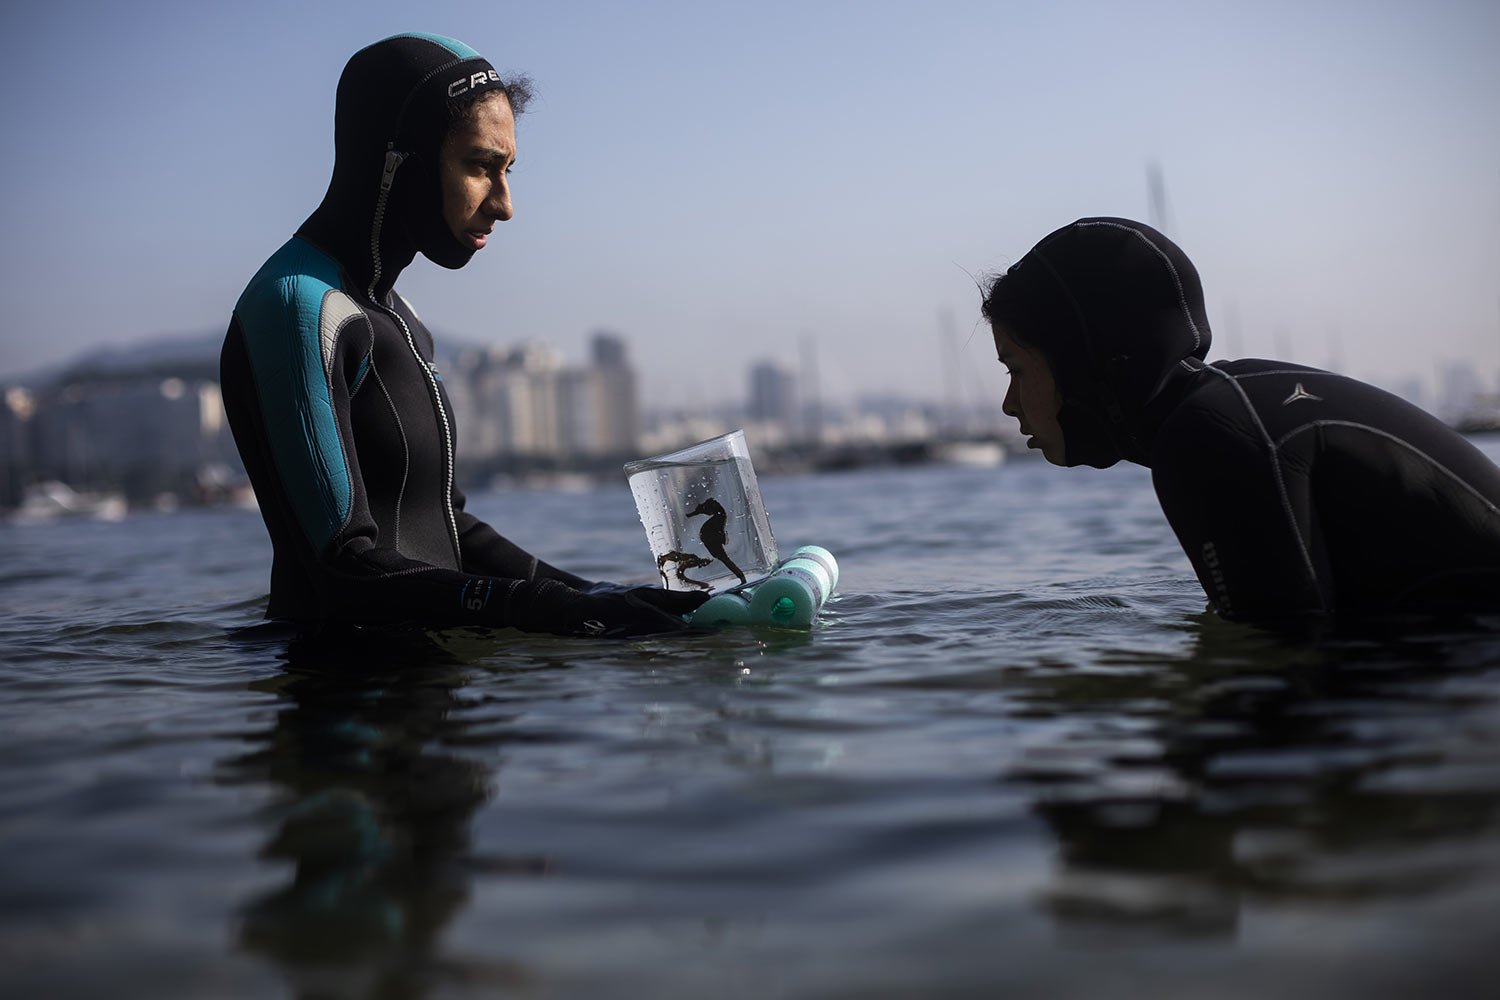  Biologists Gabriela Santos, left and Tatiana, collect seahorses in the waters of Urca beach as part of a project run by the Santa Ursula University, in Rio de Janeiro, Brazil, Monday, June 20, 2022. (AP Photo/Bruna Prado) 